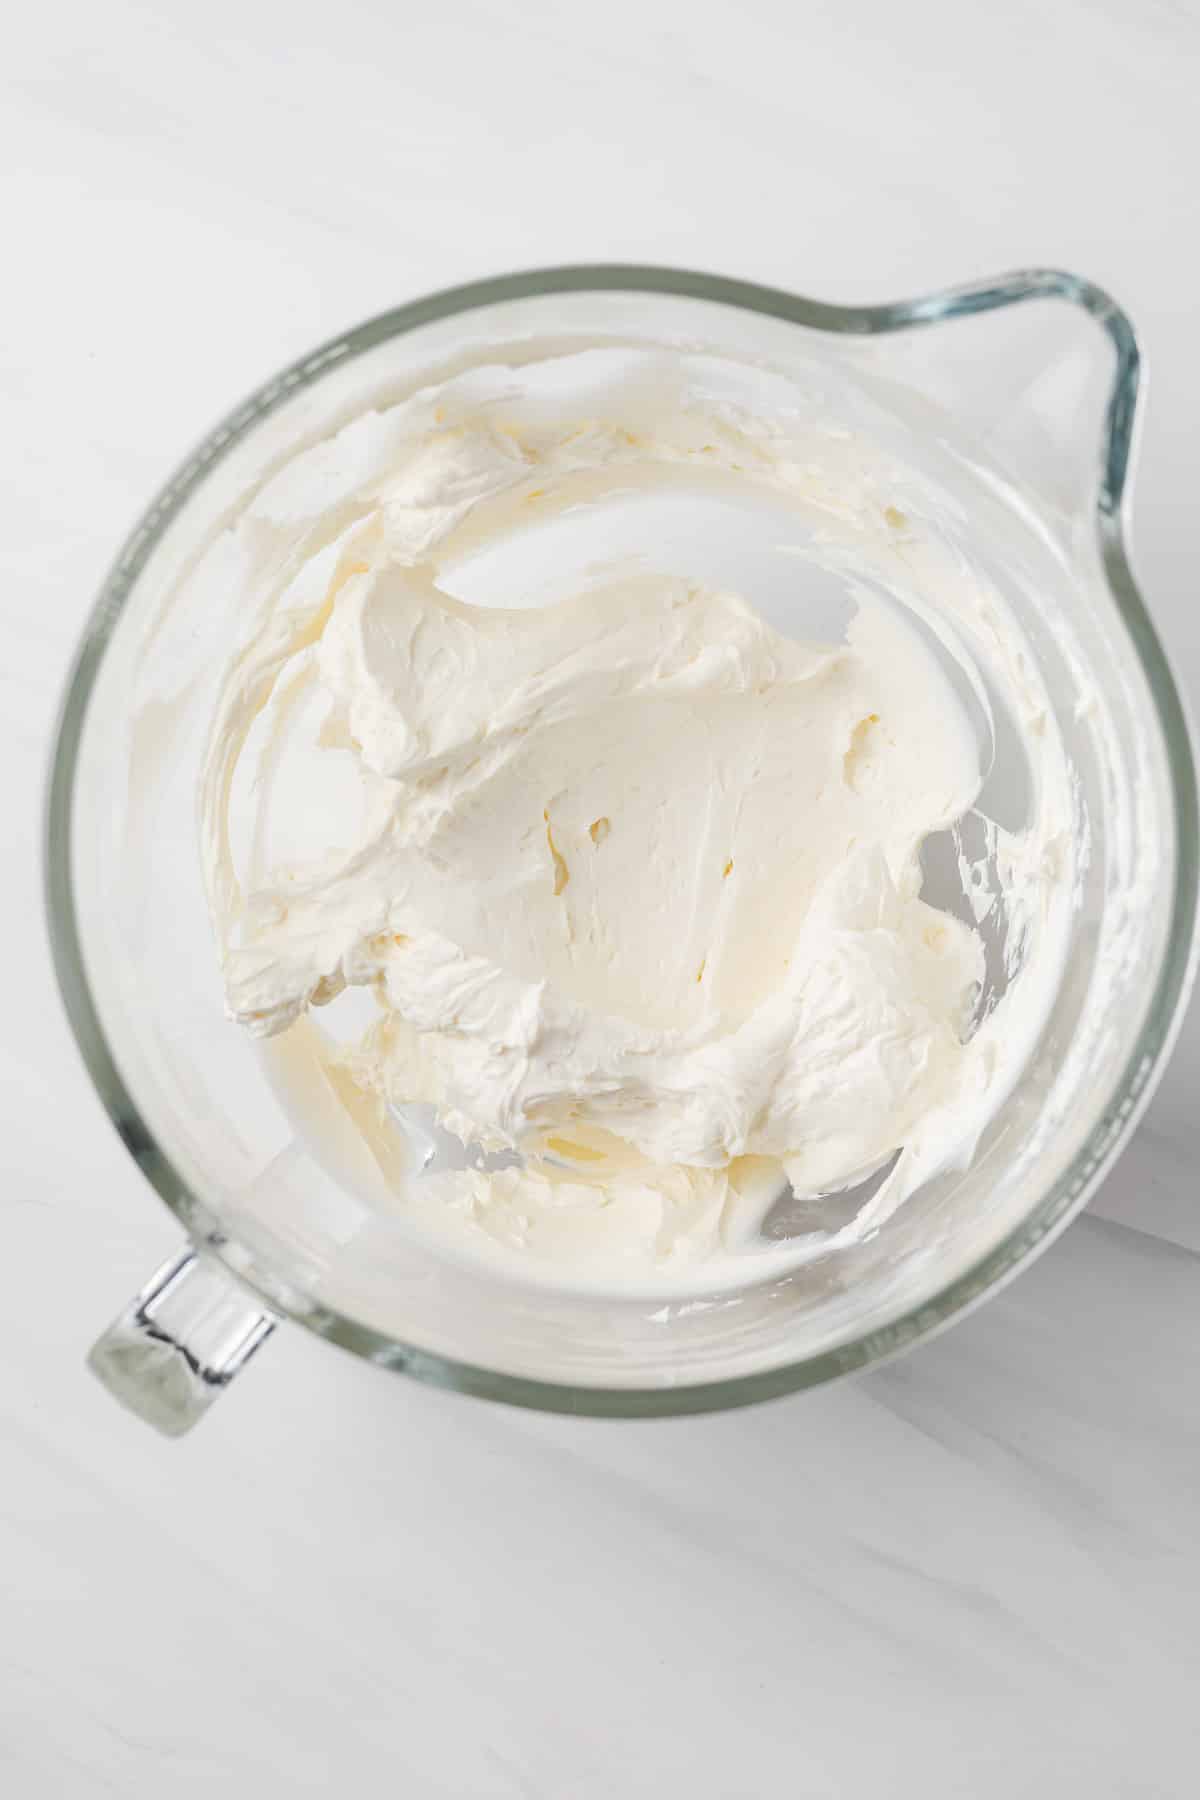 Cream cheese whipped in glass bowl.